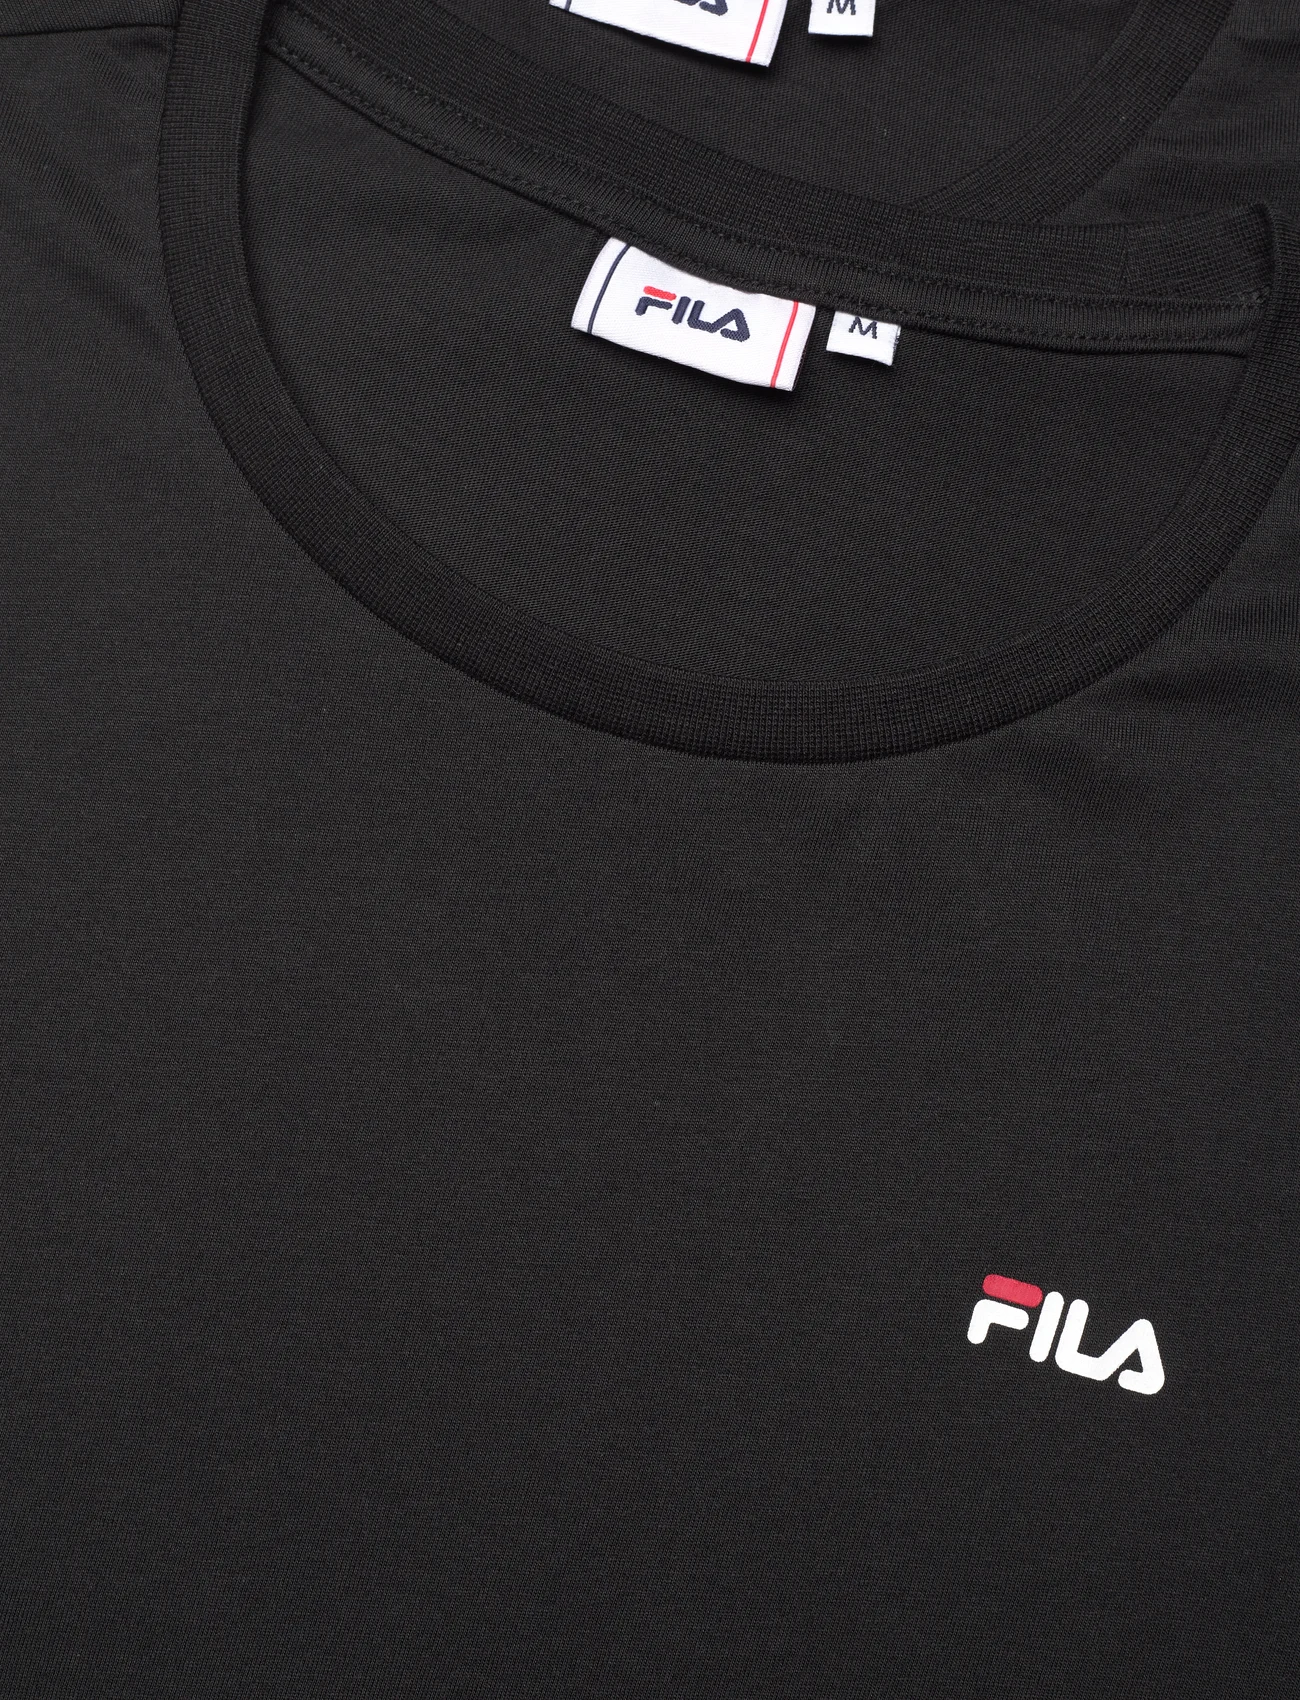 FILA - BROD tee / double pack - lowest prices - black-black - 1